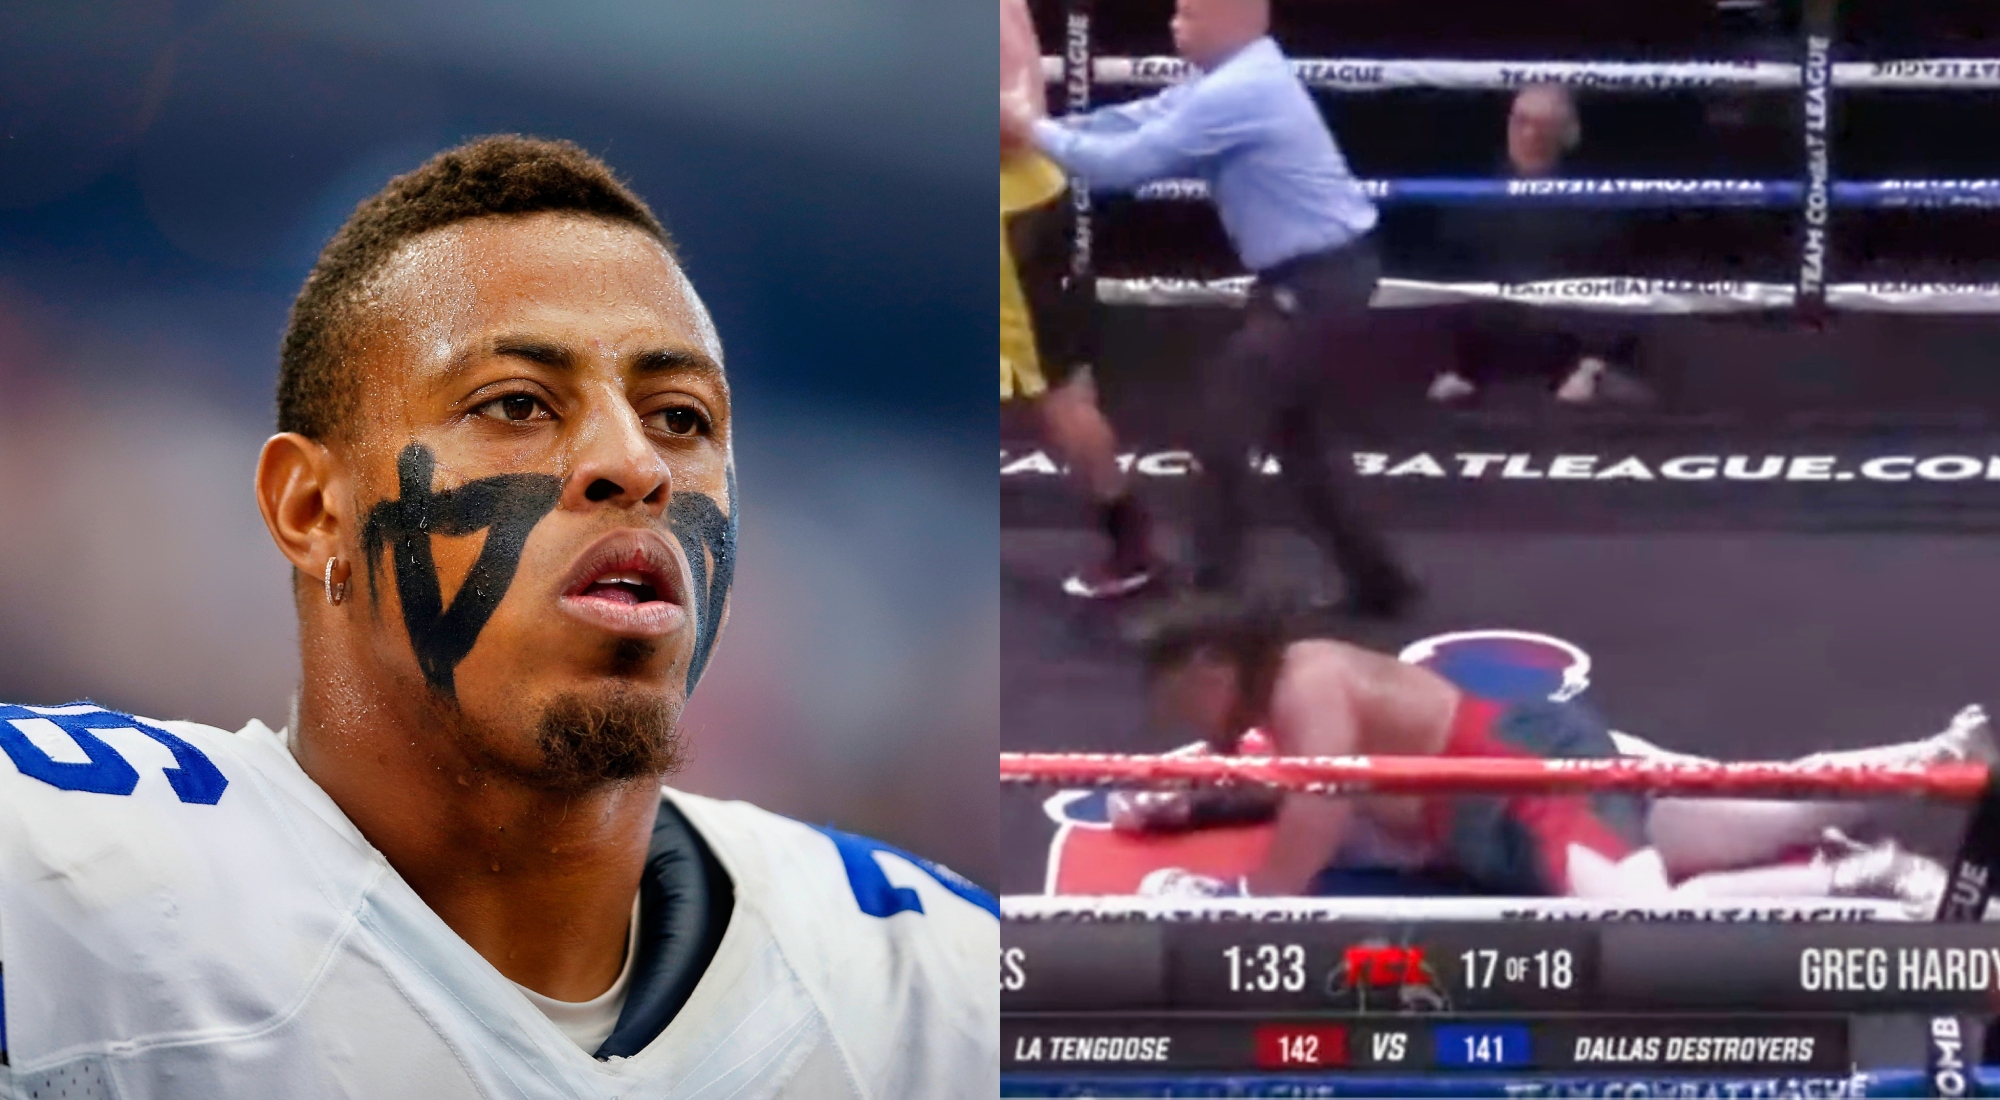 Greg Hardy KO: Twitter reacts to MMA star's 17-second knockout